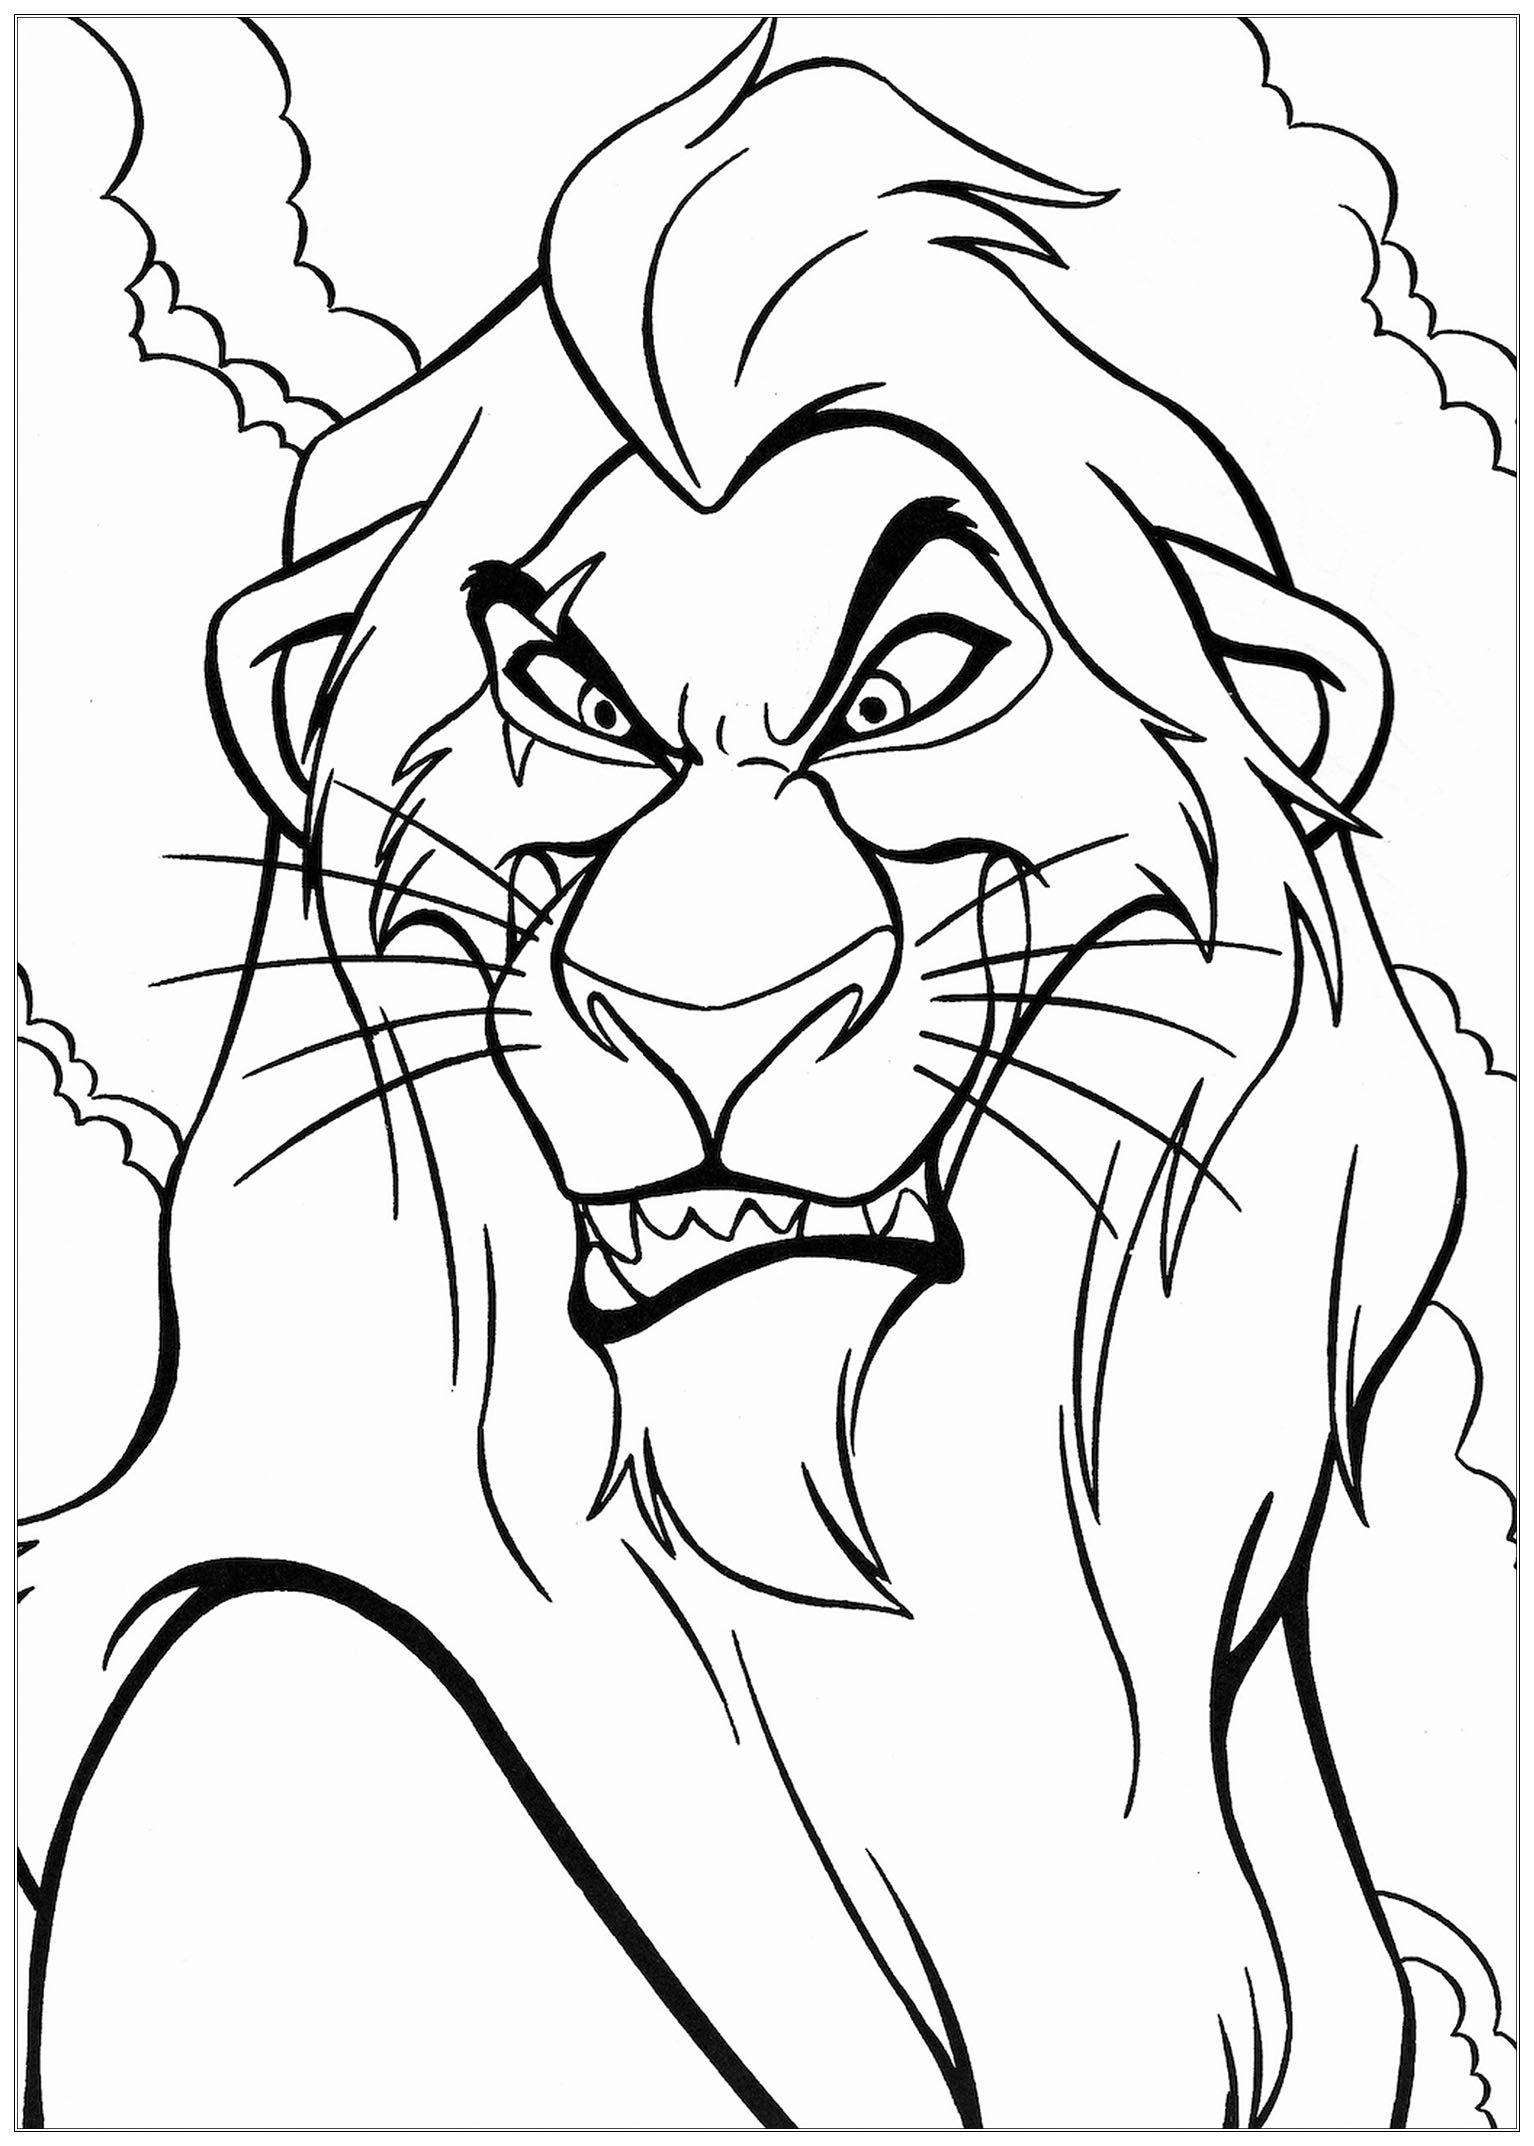 62 Coloring Pages Disney Lion King  Best Free